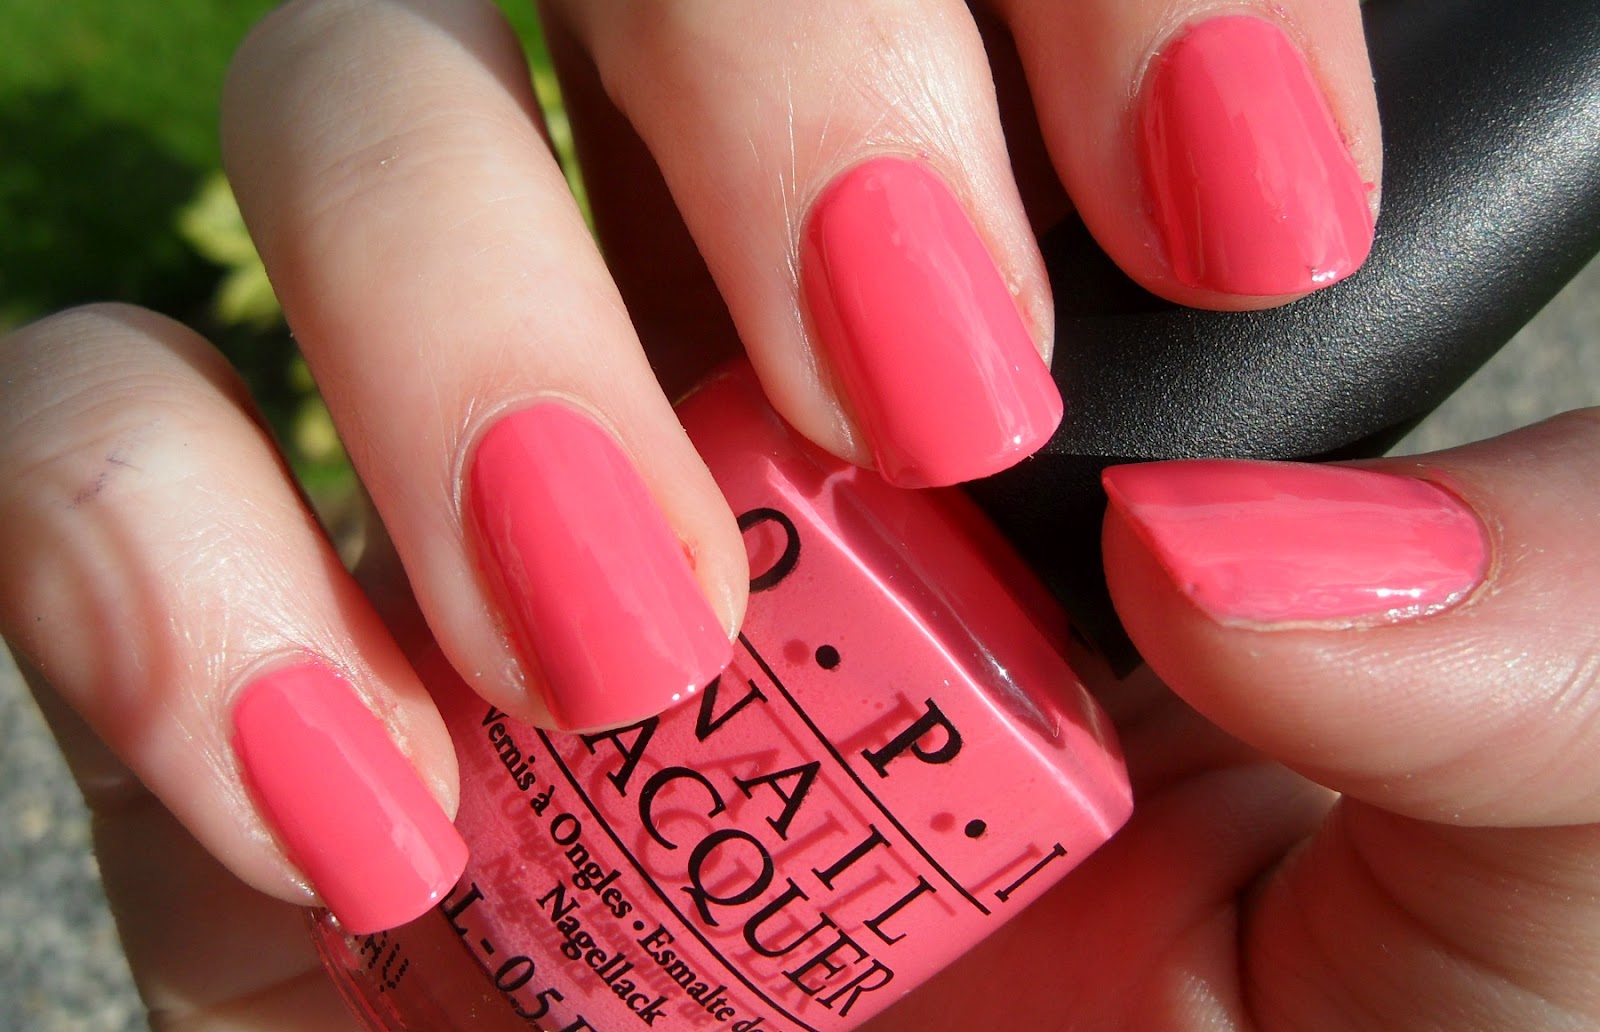 Top 10 Must-Have OPI Nail Polish Colors - wide 11